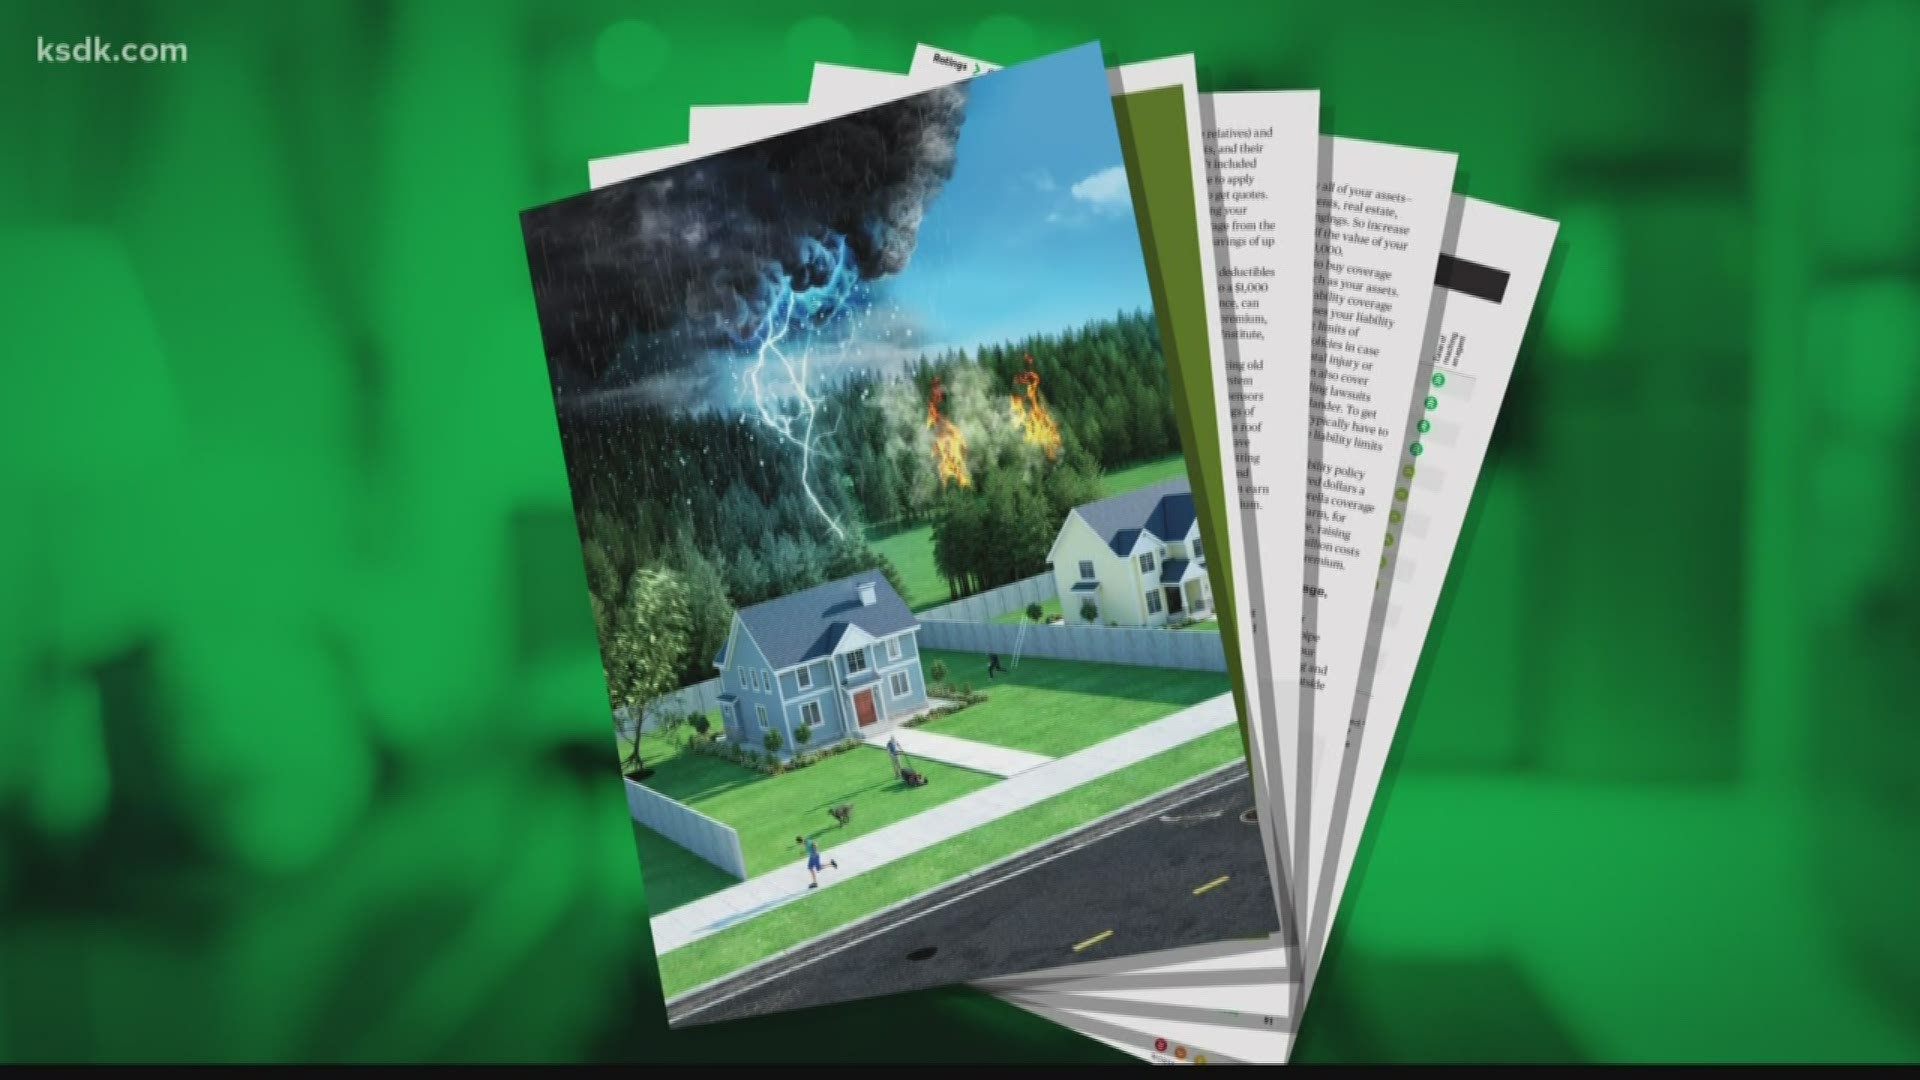 Consumer Reports is out with their latest ratings to save you money on homeowner's insurance.